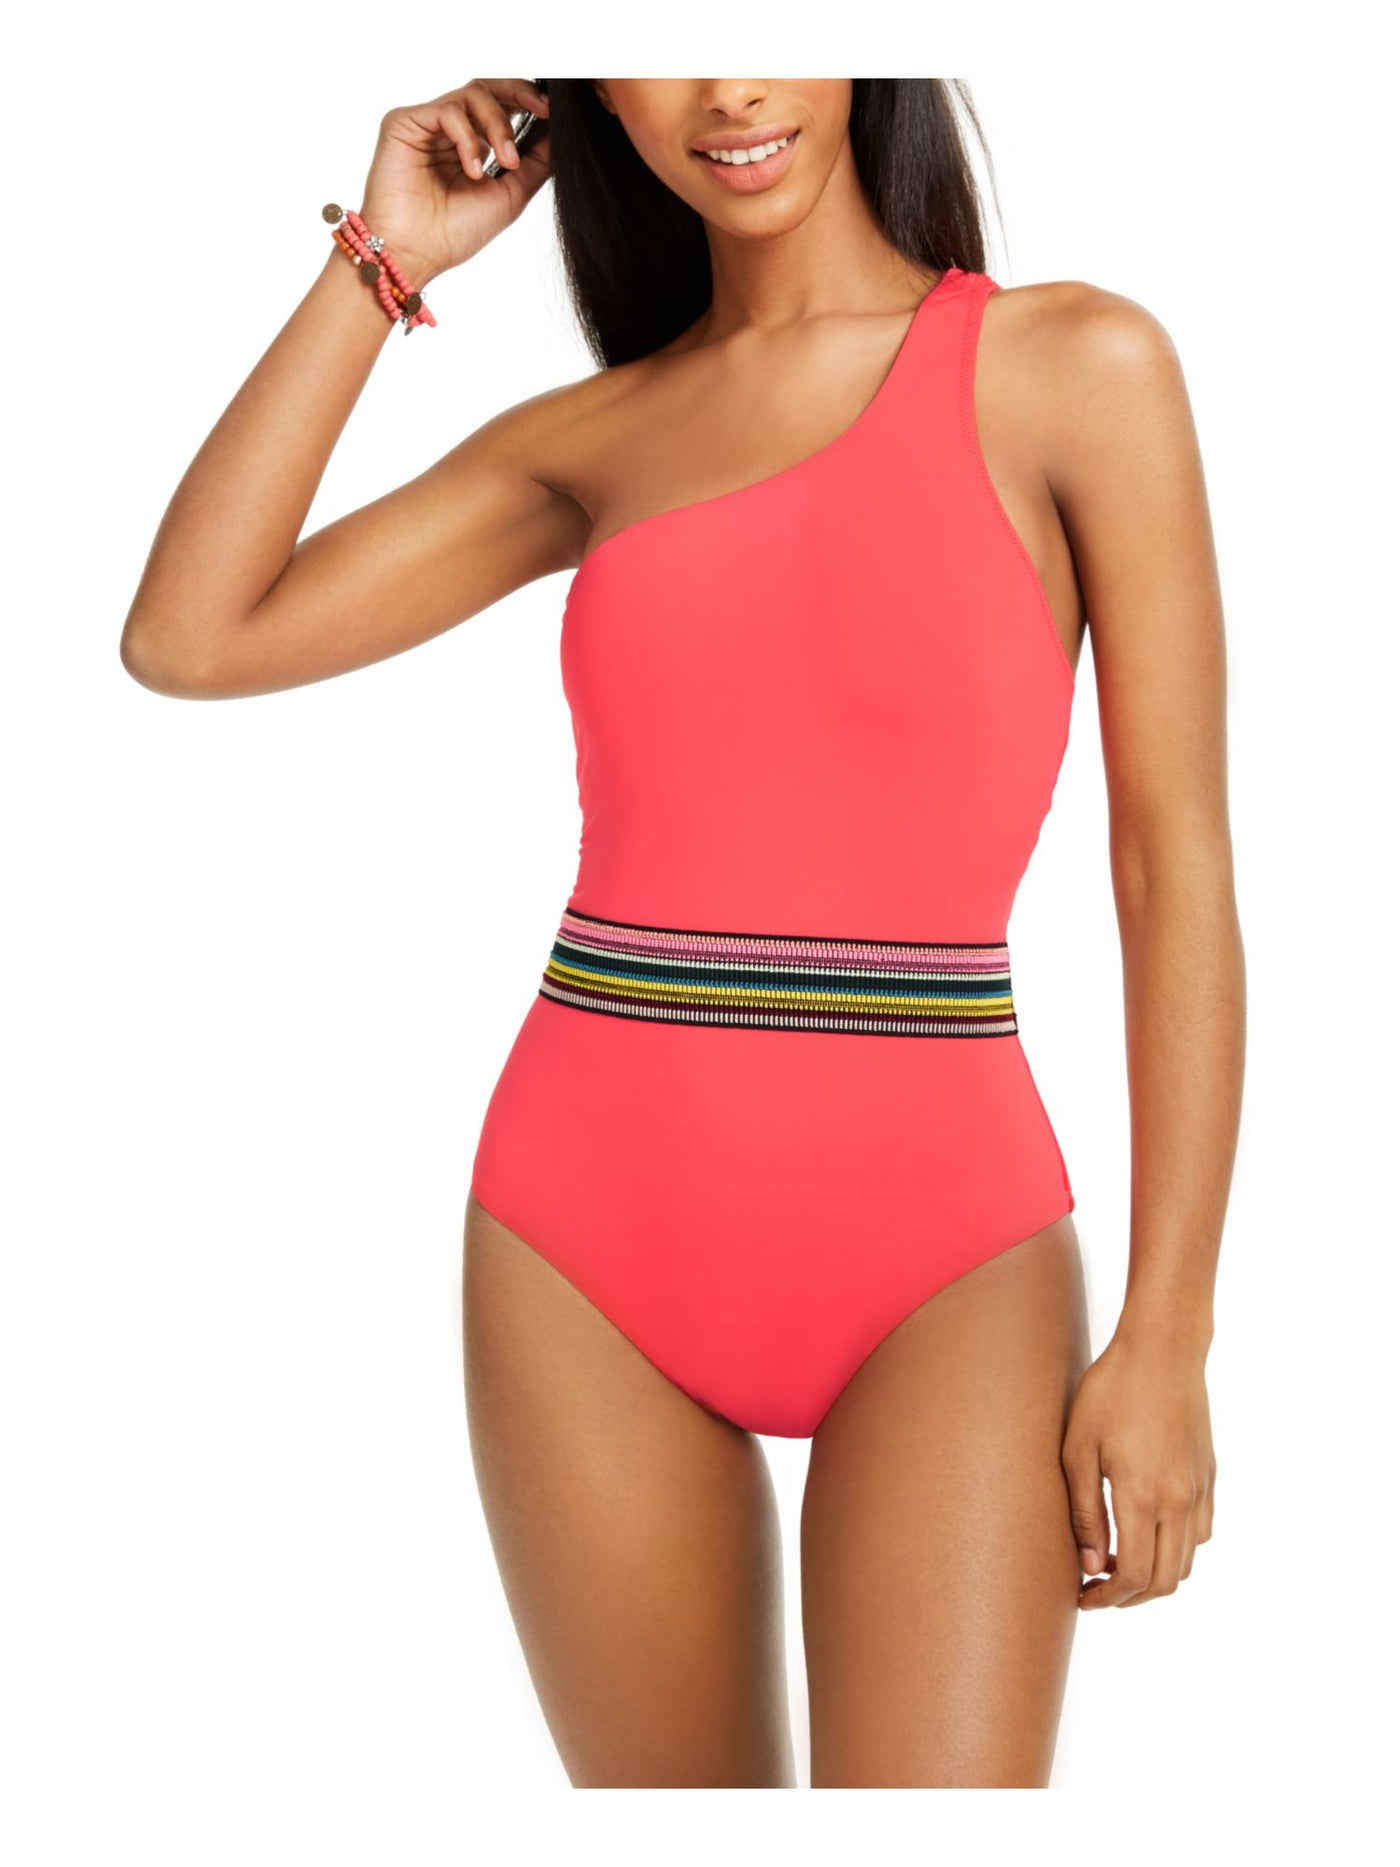 BAR III Women's Coral Stretch Asymmetrical Elastic Trim Waist Moderate Coverage Tie Cabo Wabo One Piece Swimsuit XS